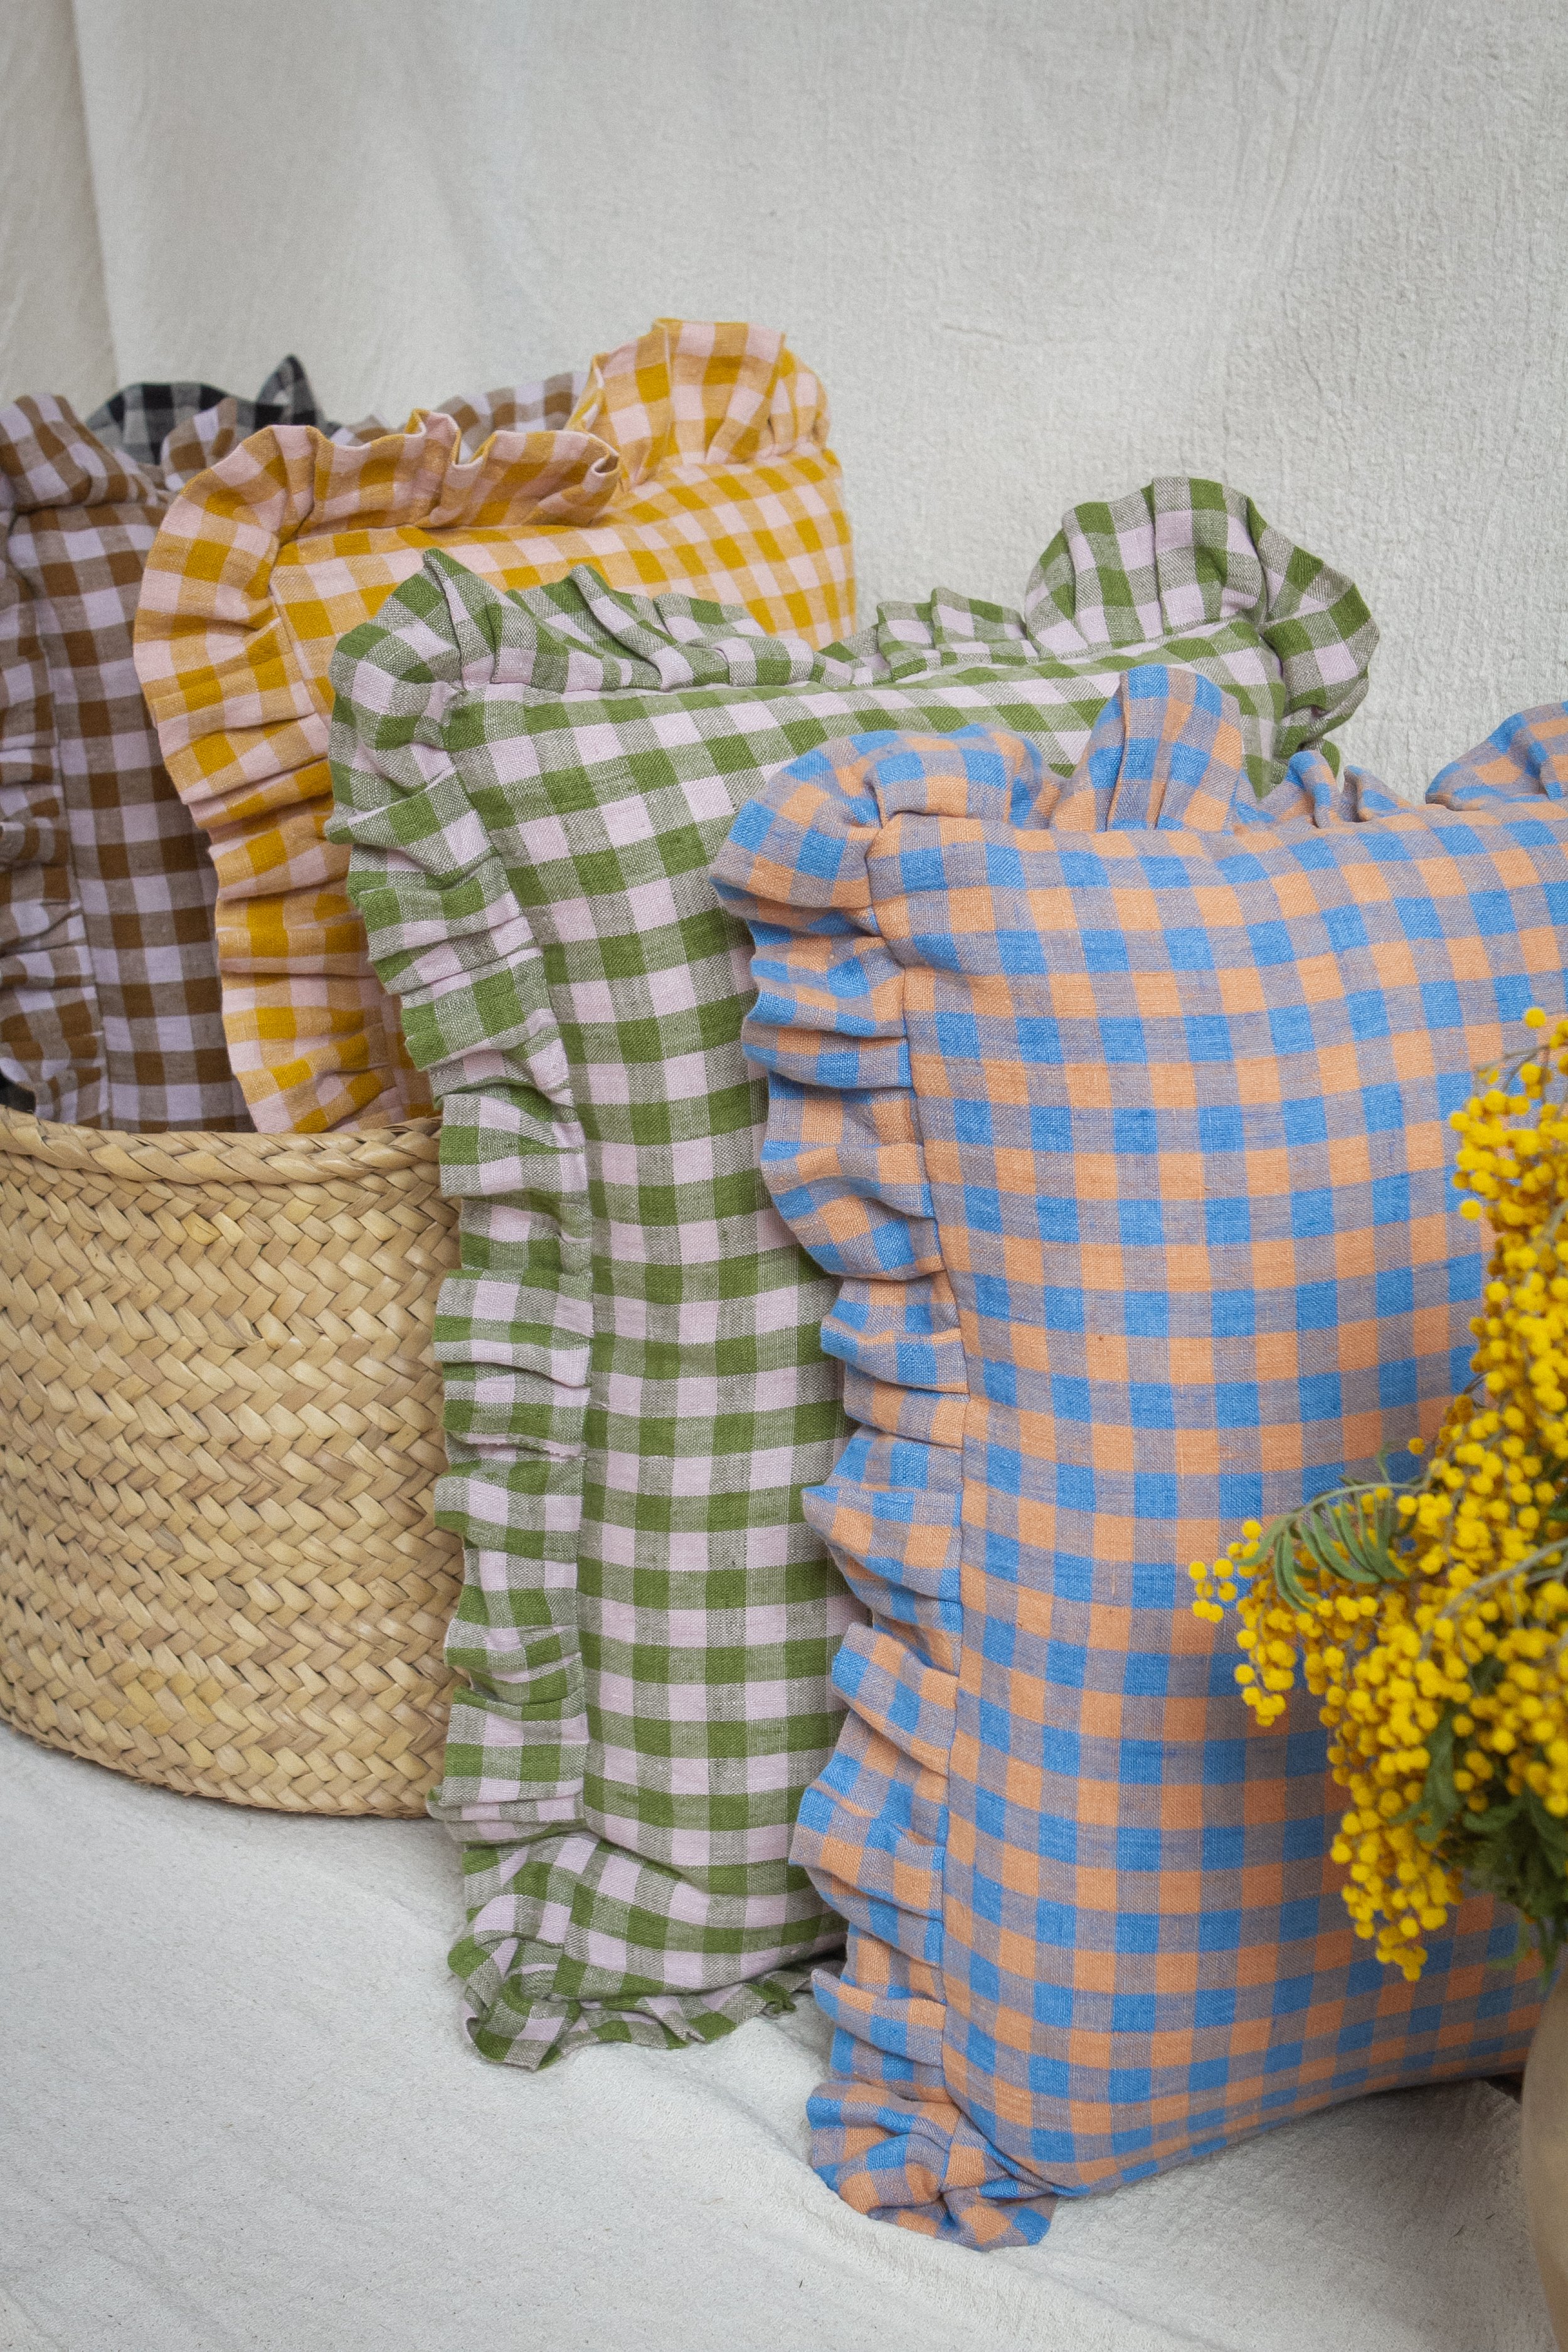  gingham linen cushions with a frill - handmade by Hedge